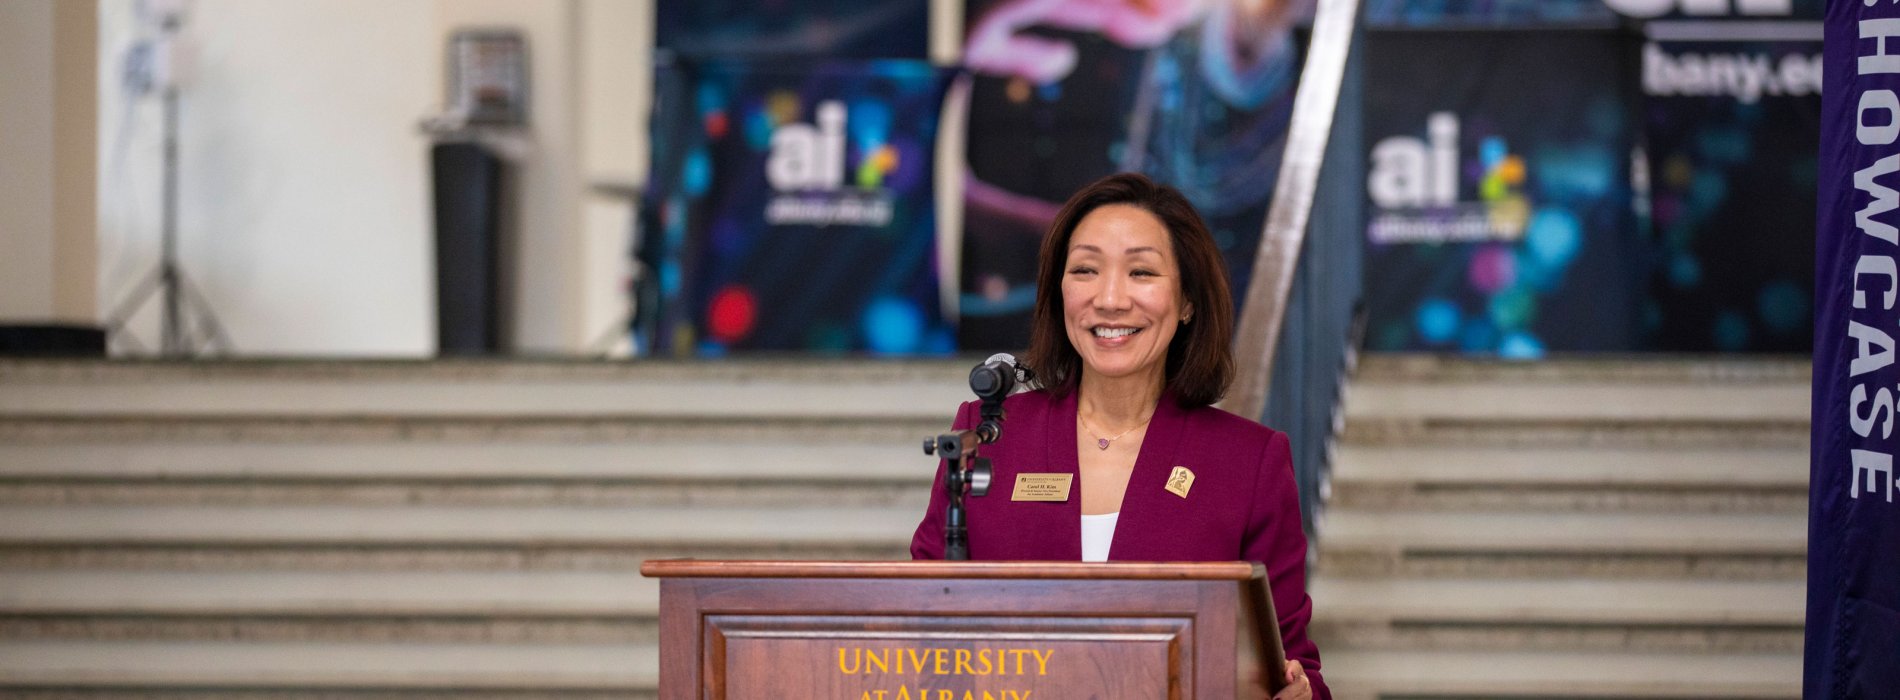 UAlbany Provost Carol Kim smiles while speaking at a University podium, with posters for the AI-Plus initiative behind her.